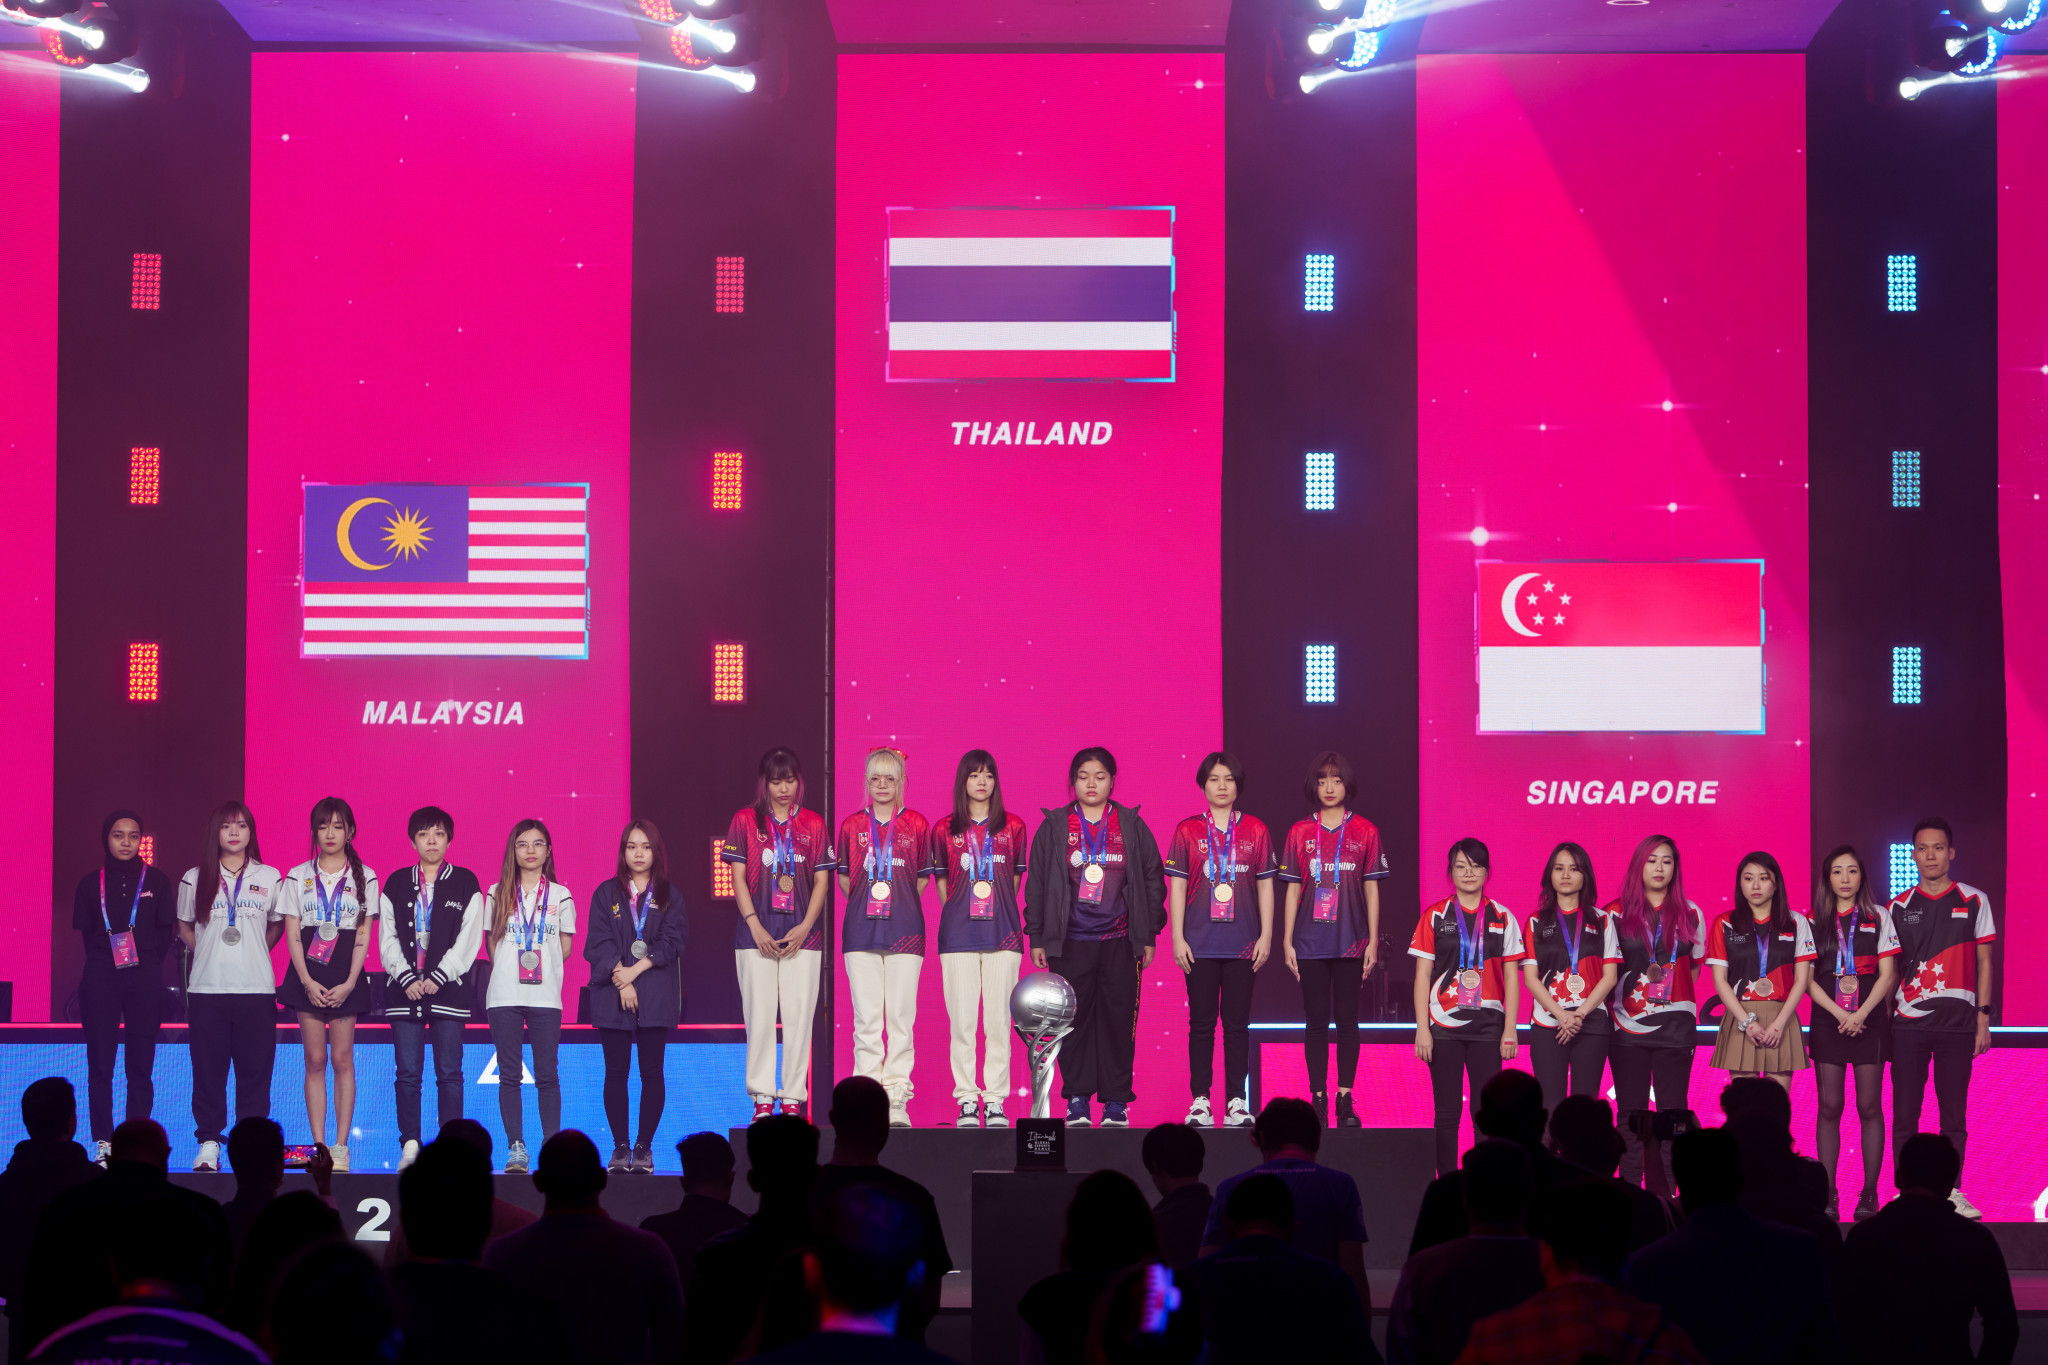 The medal ceremony was then able to take place and saw Thailand awarded their well-deserved golds ©Ben Queenborough/GEF